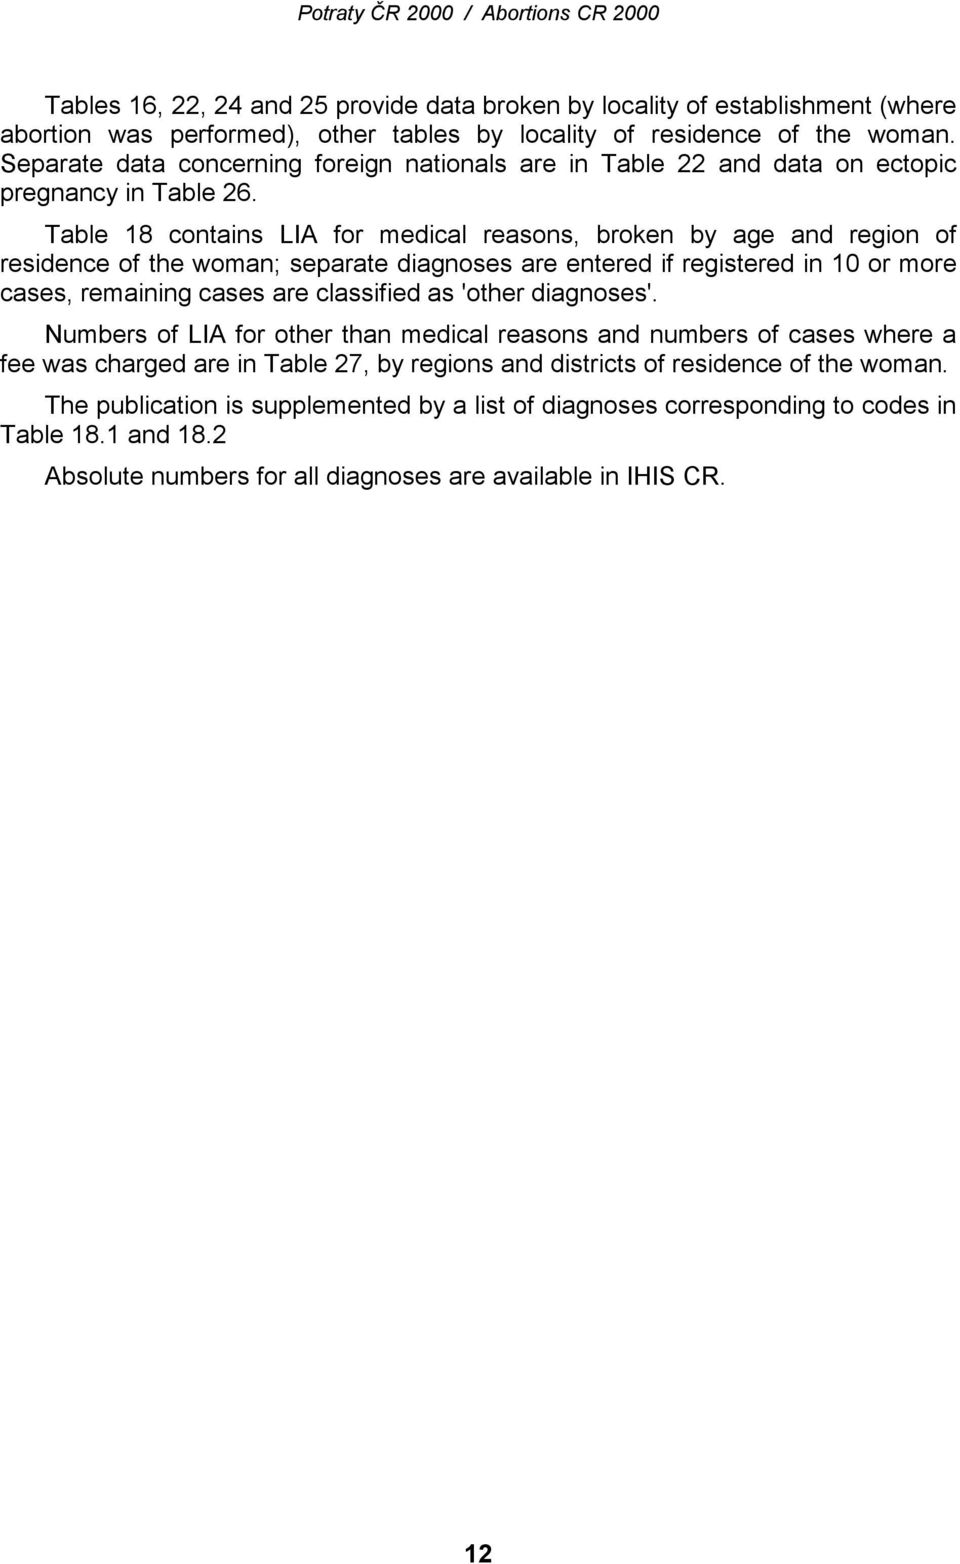 Table 18 contains LIA for medical reasons, broken by age and region of residence of the woman; separate diagnoses are entered if registered in 10 or more cases, remaining cases are classified as